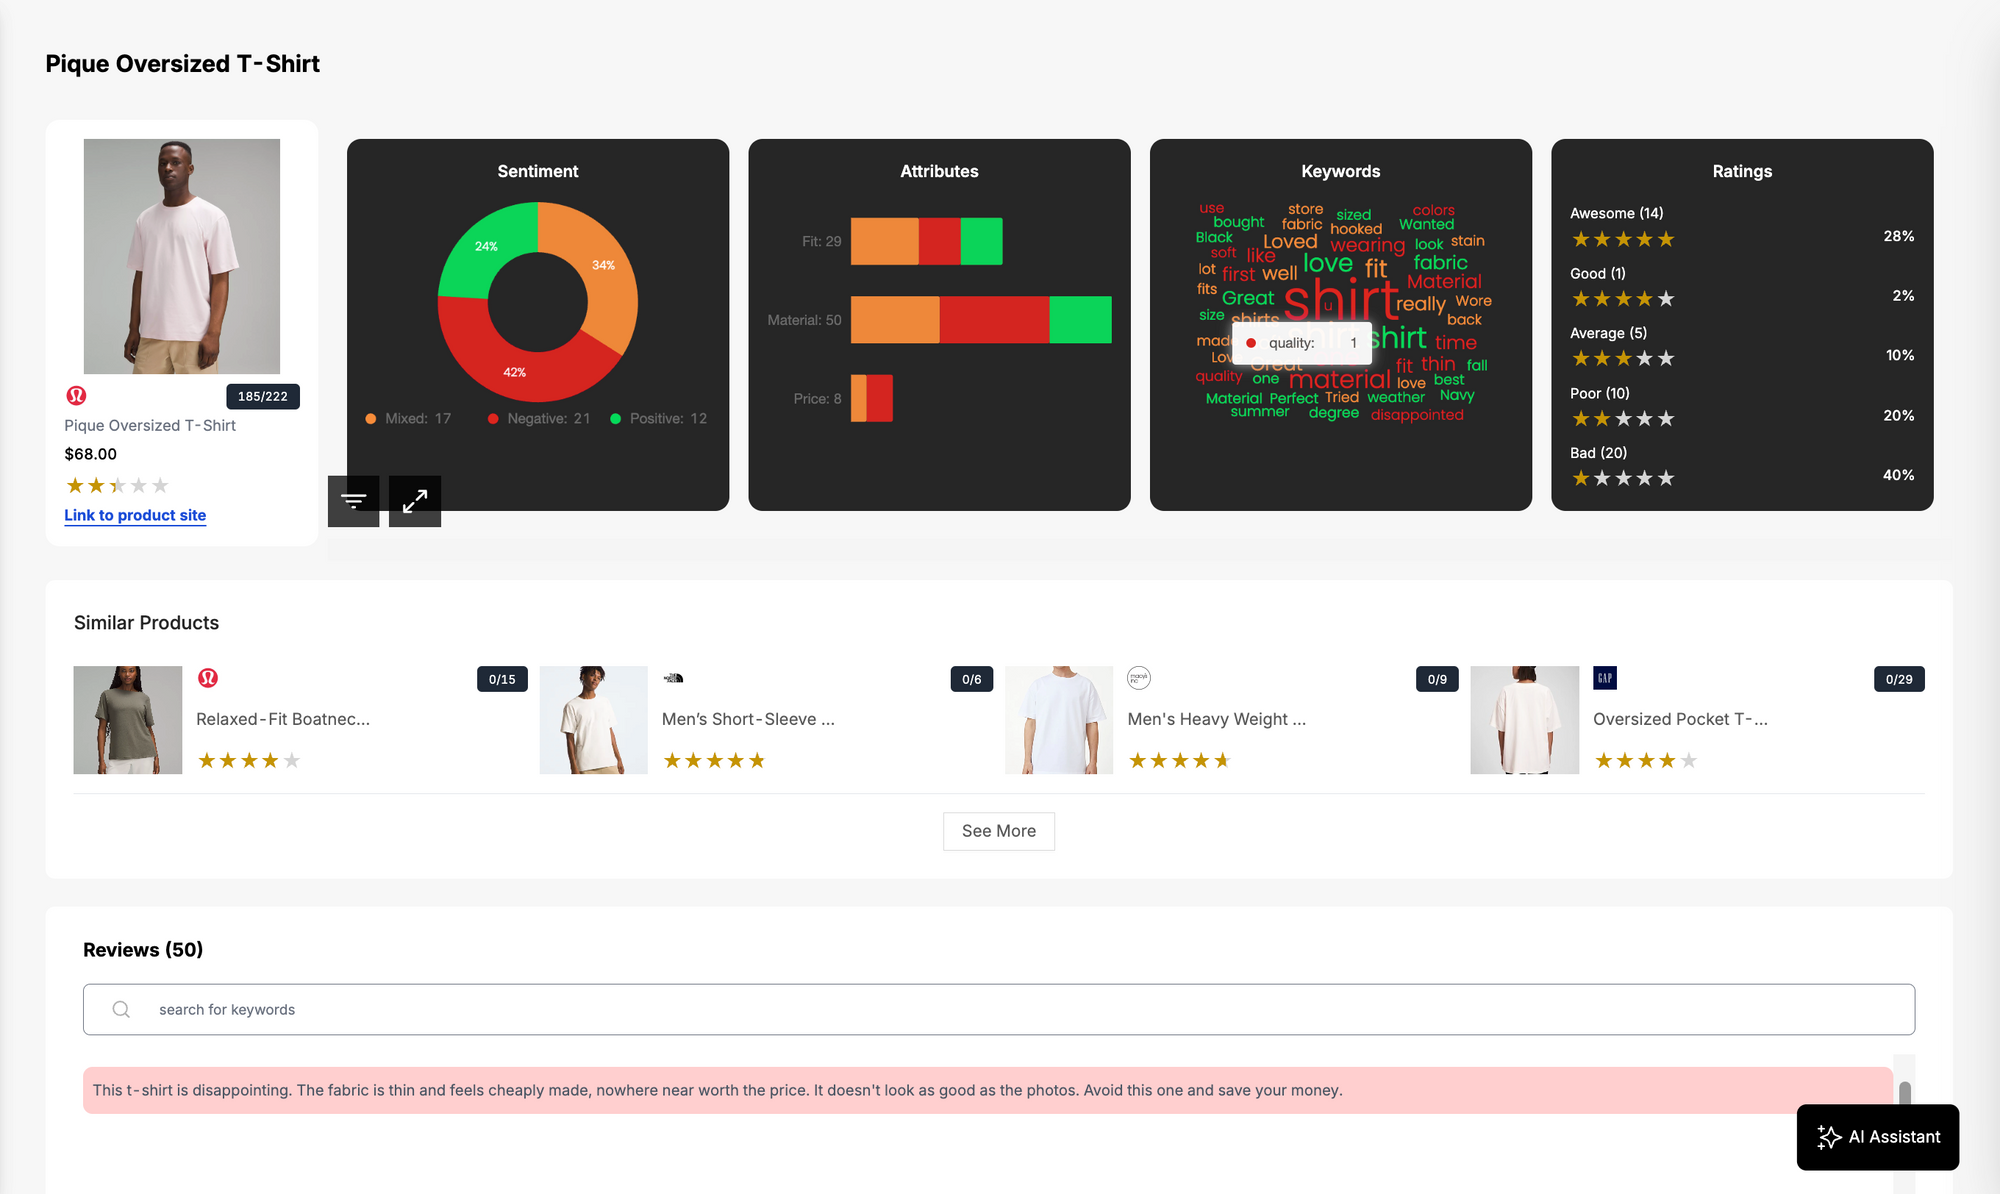 Woven Insights' consumer insights dashboard, showing insights into the material of a shirt, based on AI-powered analysis of customer reviews about the shirt.